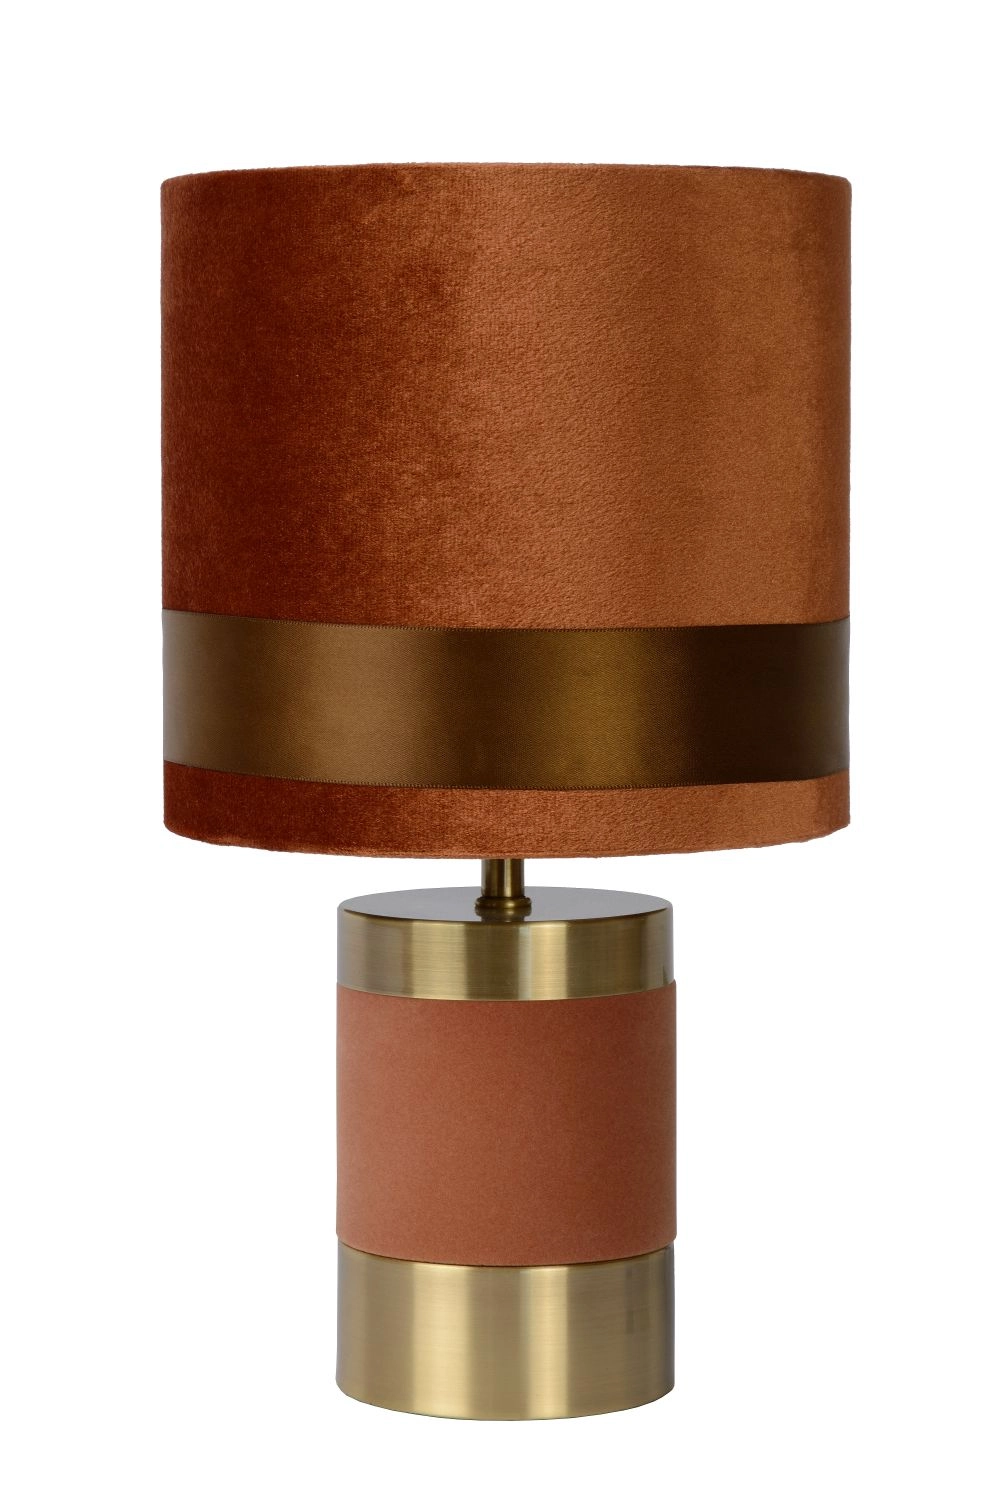 LU 10500/81/43 Lucide EXTRAVAGANZA FRIZZLE - Table lamp - Ø 18 cm - 1xE14 - Brown